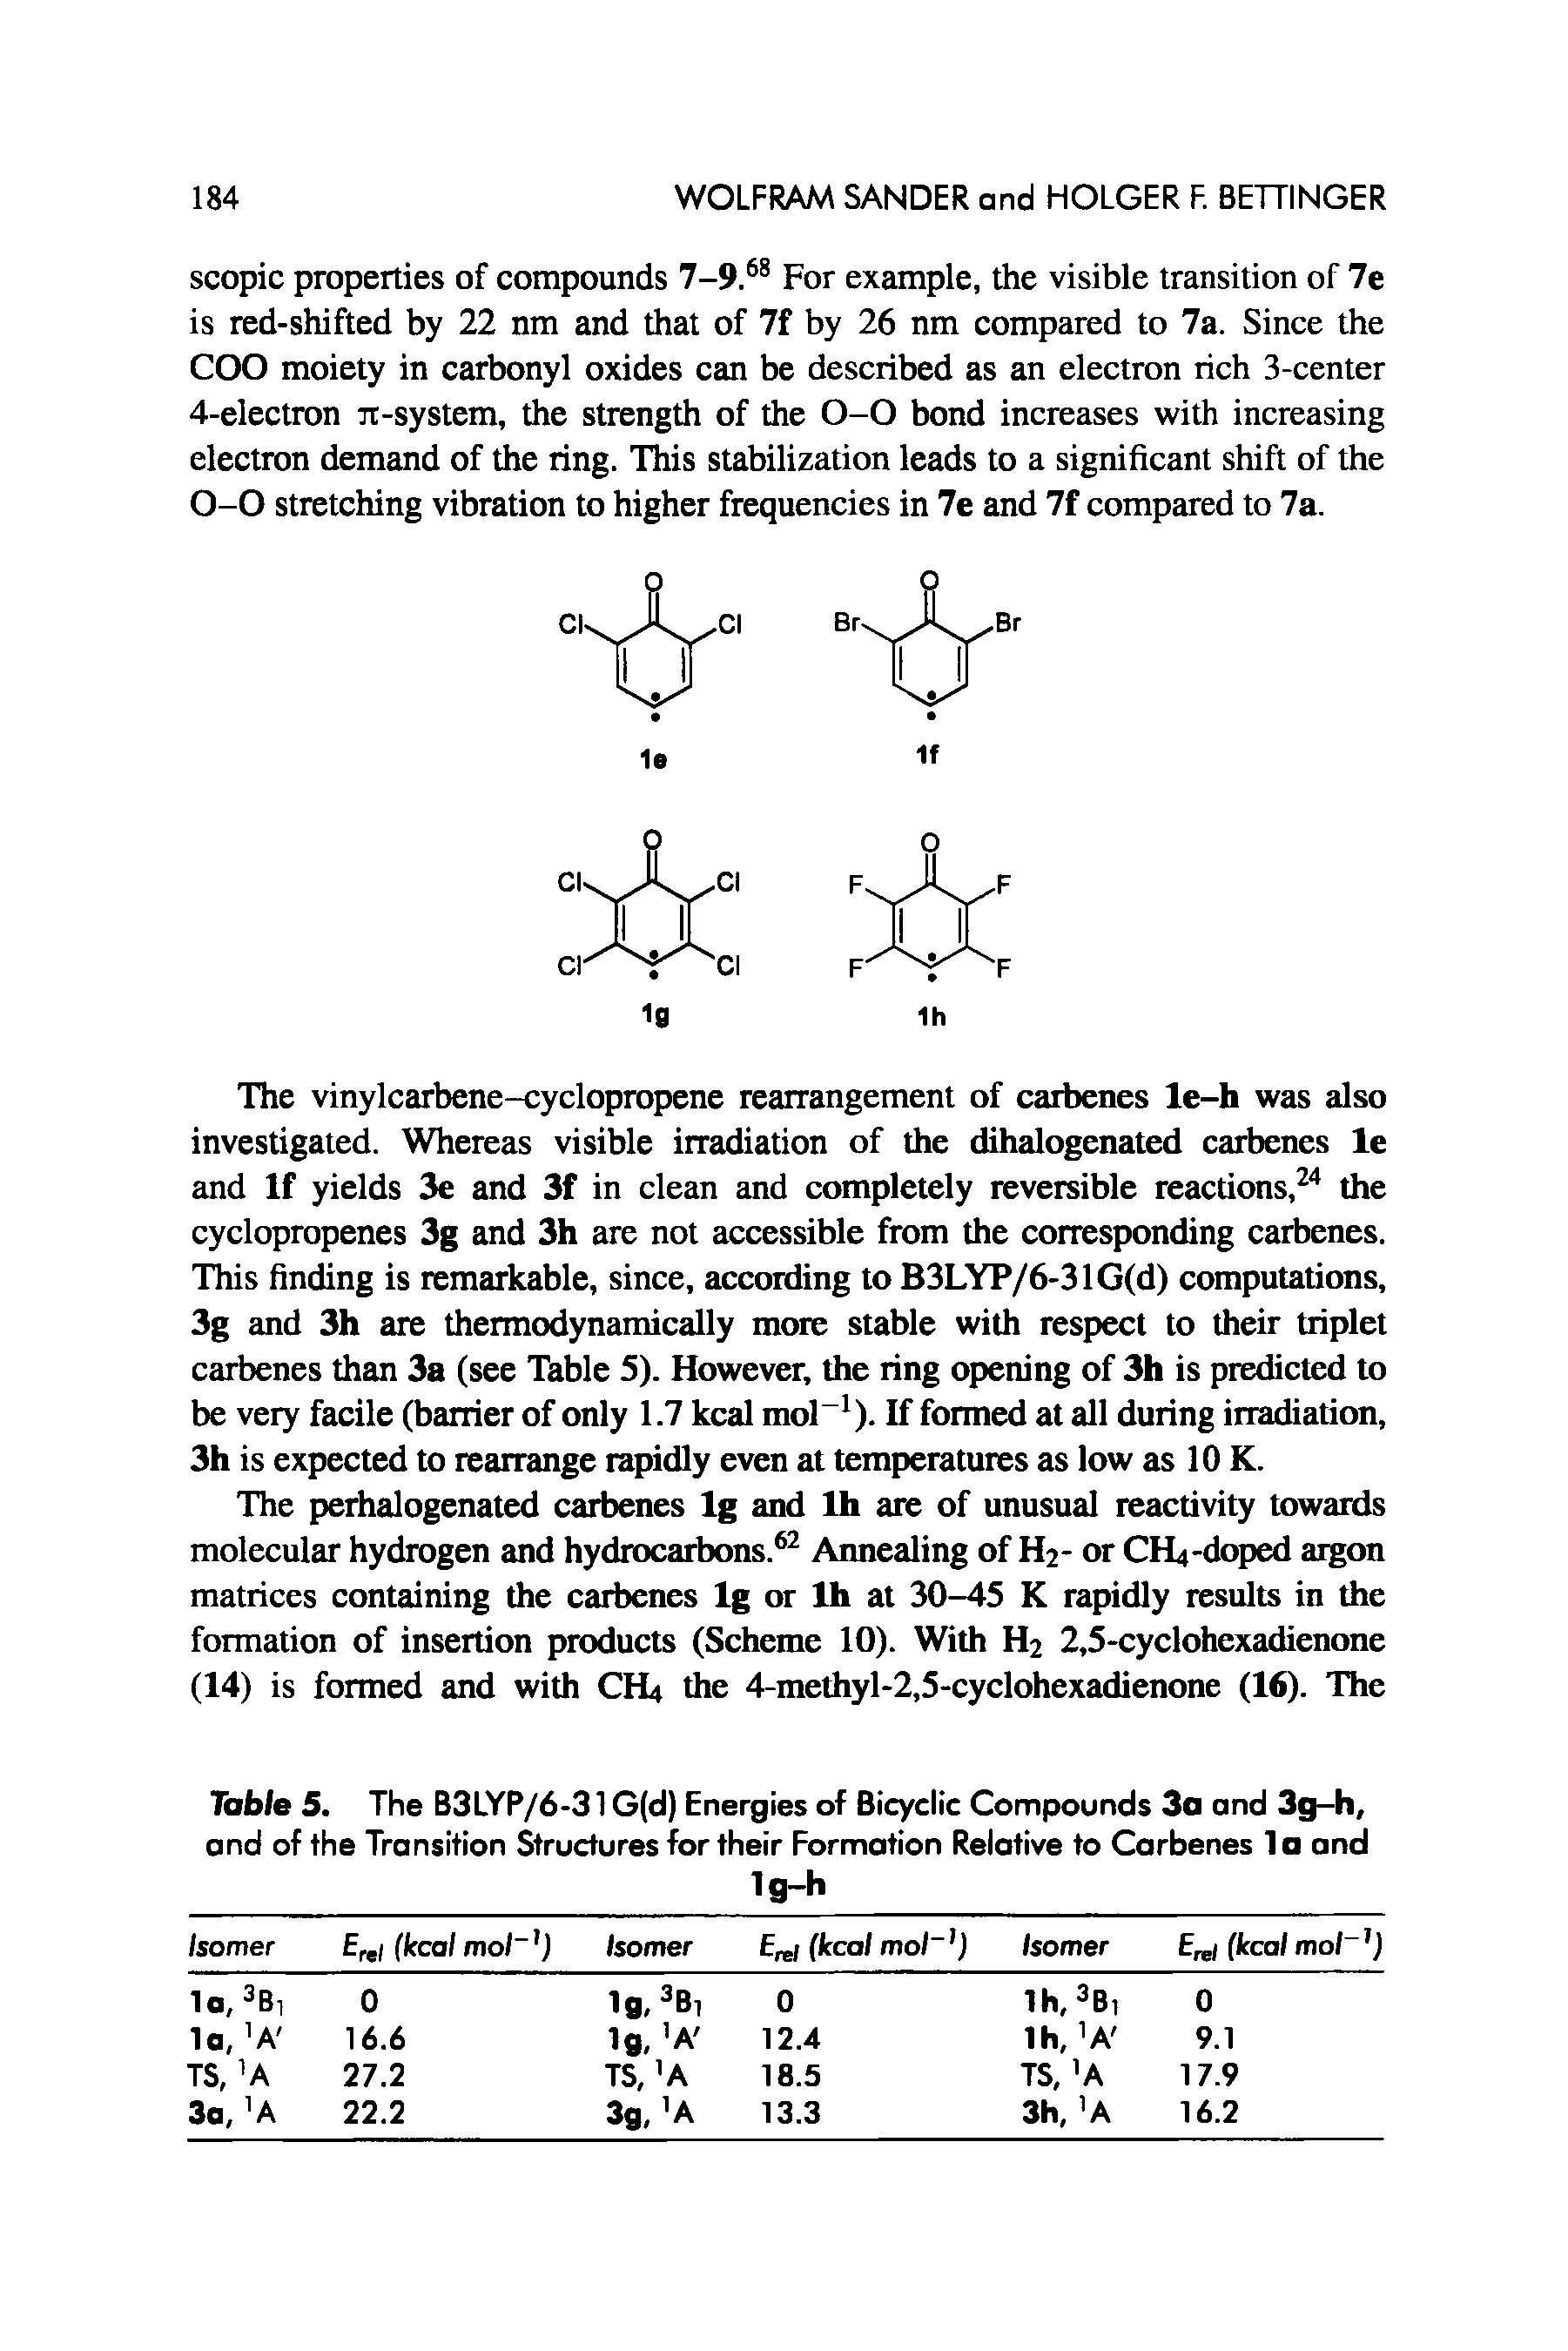 Table 5. The B3LYP/6-31 G(d) Energies of Bicydic Compounds 3a and 3g-h, and of the Transition Structures for their Formation Relative to Carbenes 1 a and...